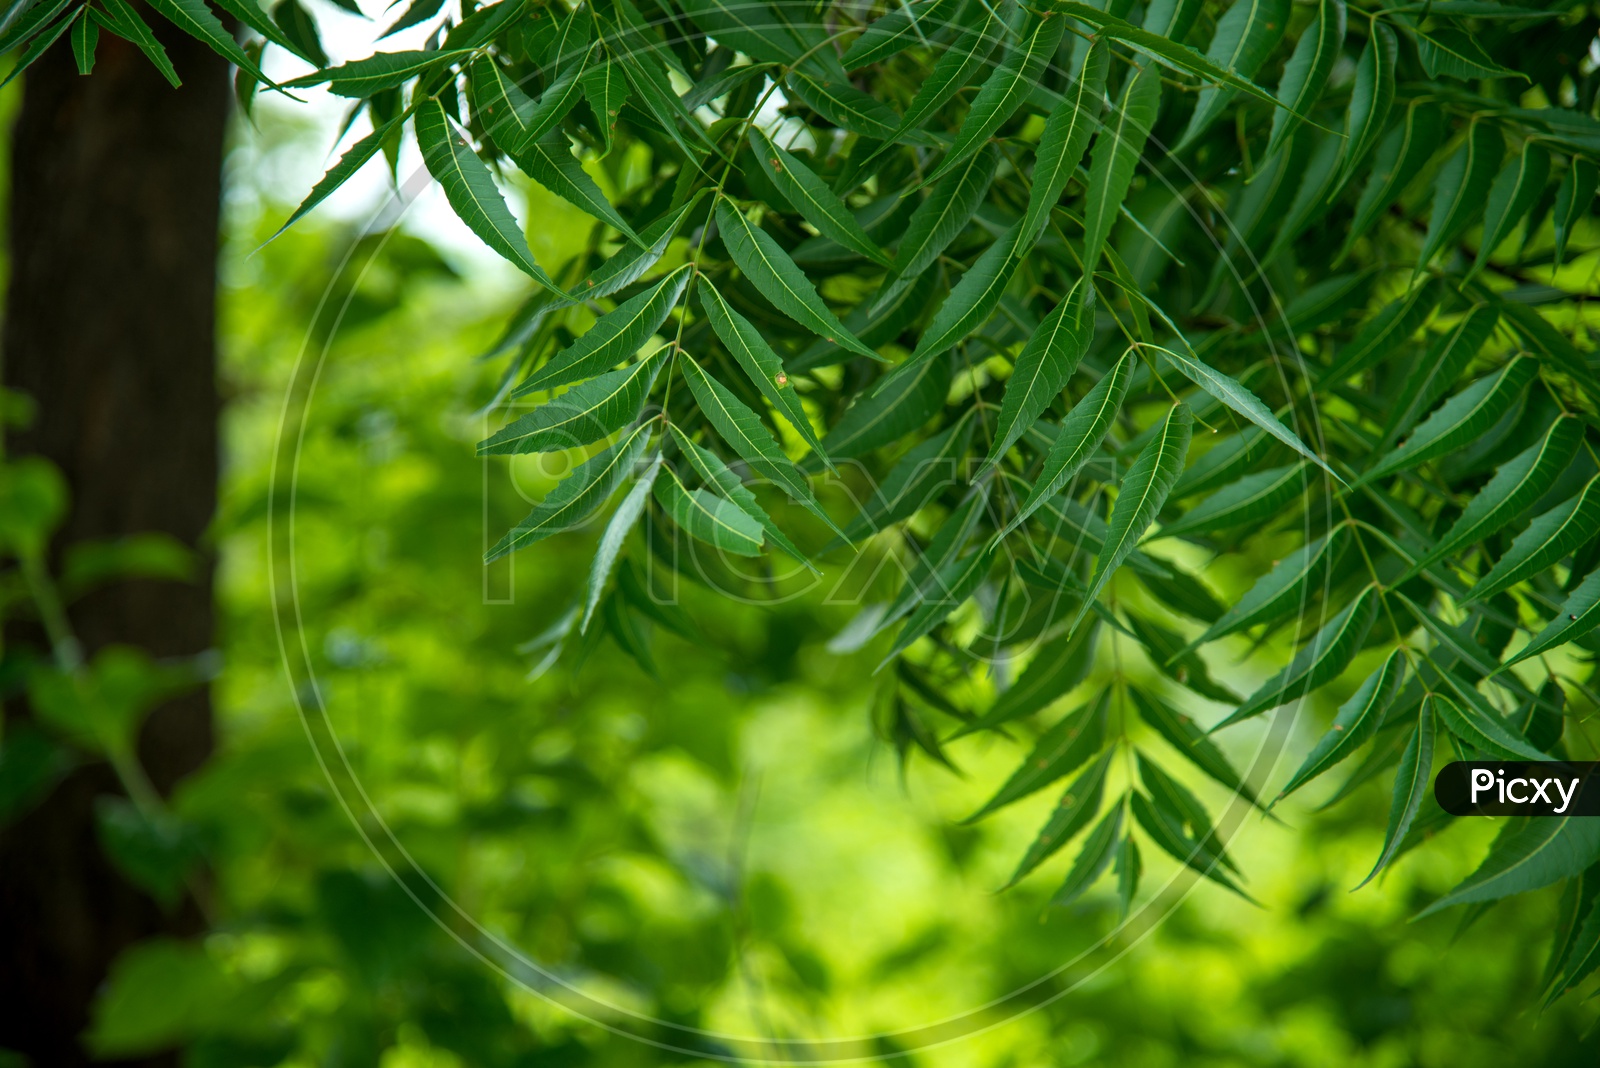 Neem Leafs or  Azadirachta  Indica   Or  Indian Lilac   Leafs On a Tree